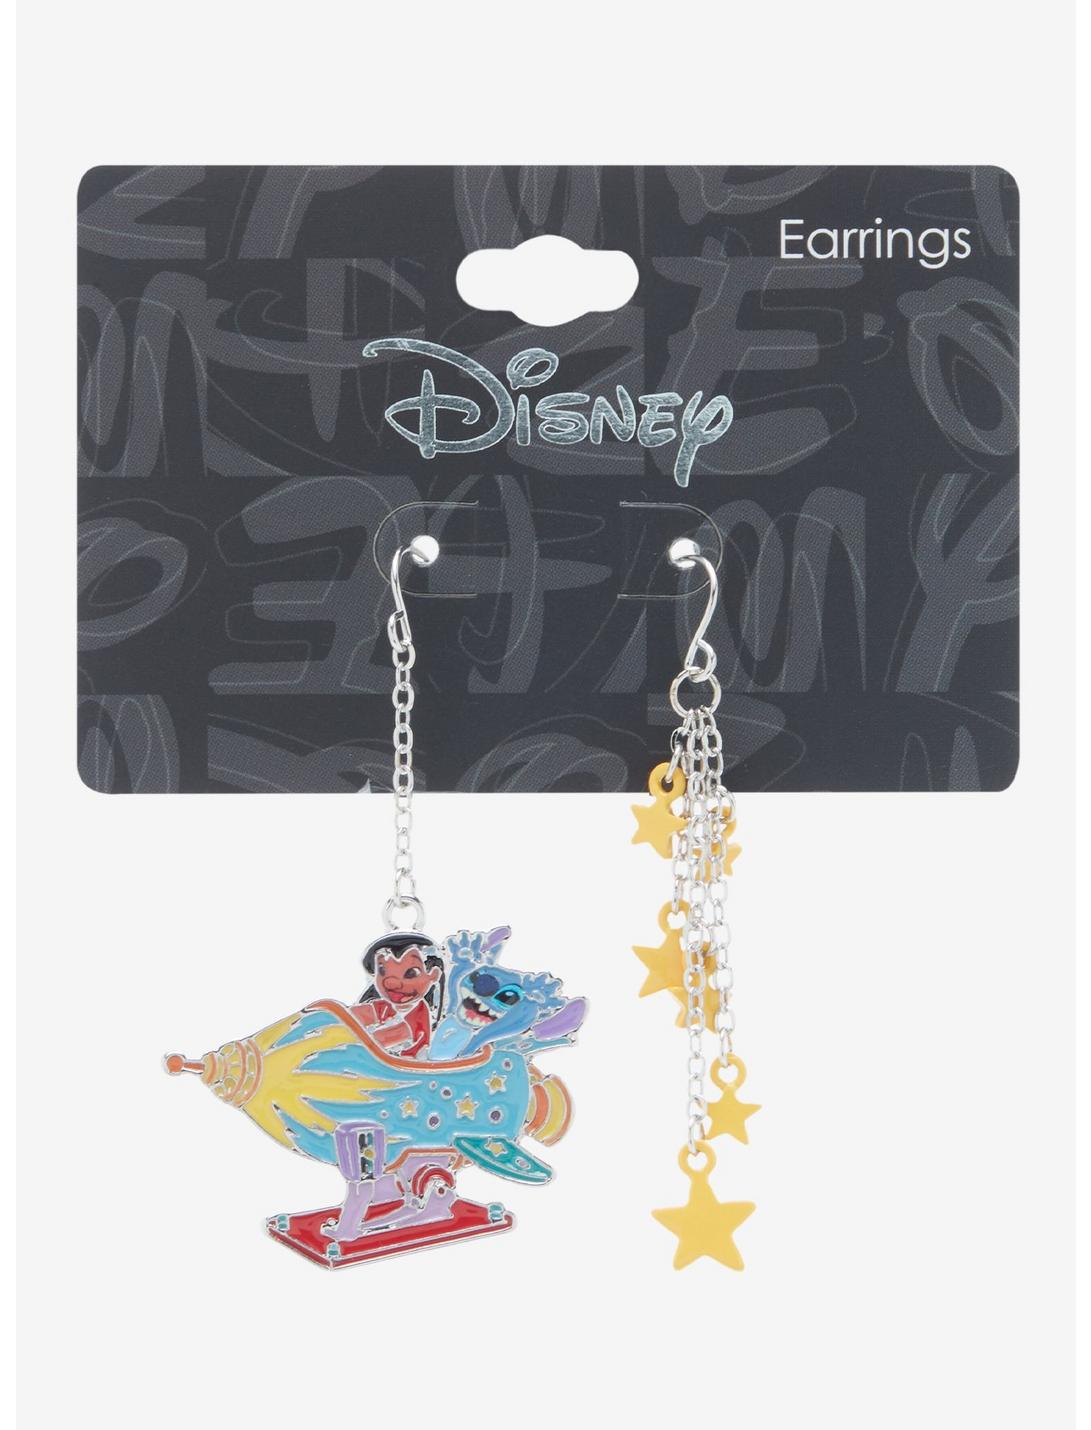 Disney Lilo & Stitch Rocket Ride and Stars Earring Set - BoxLunch Exclusive, , hi-res